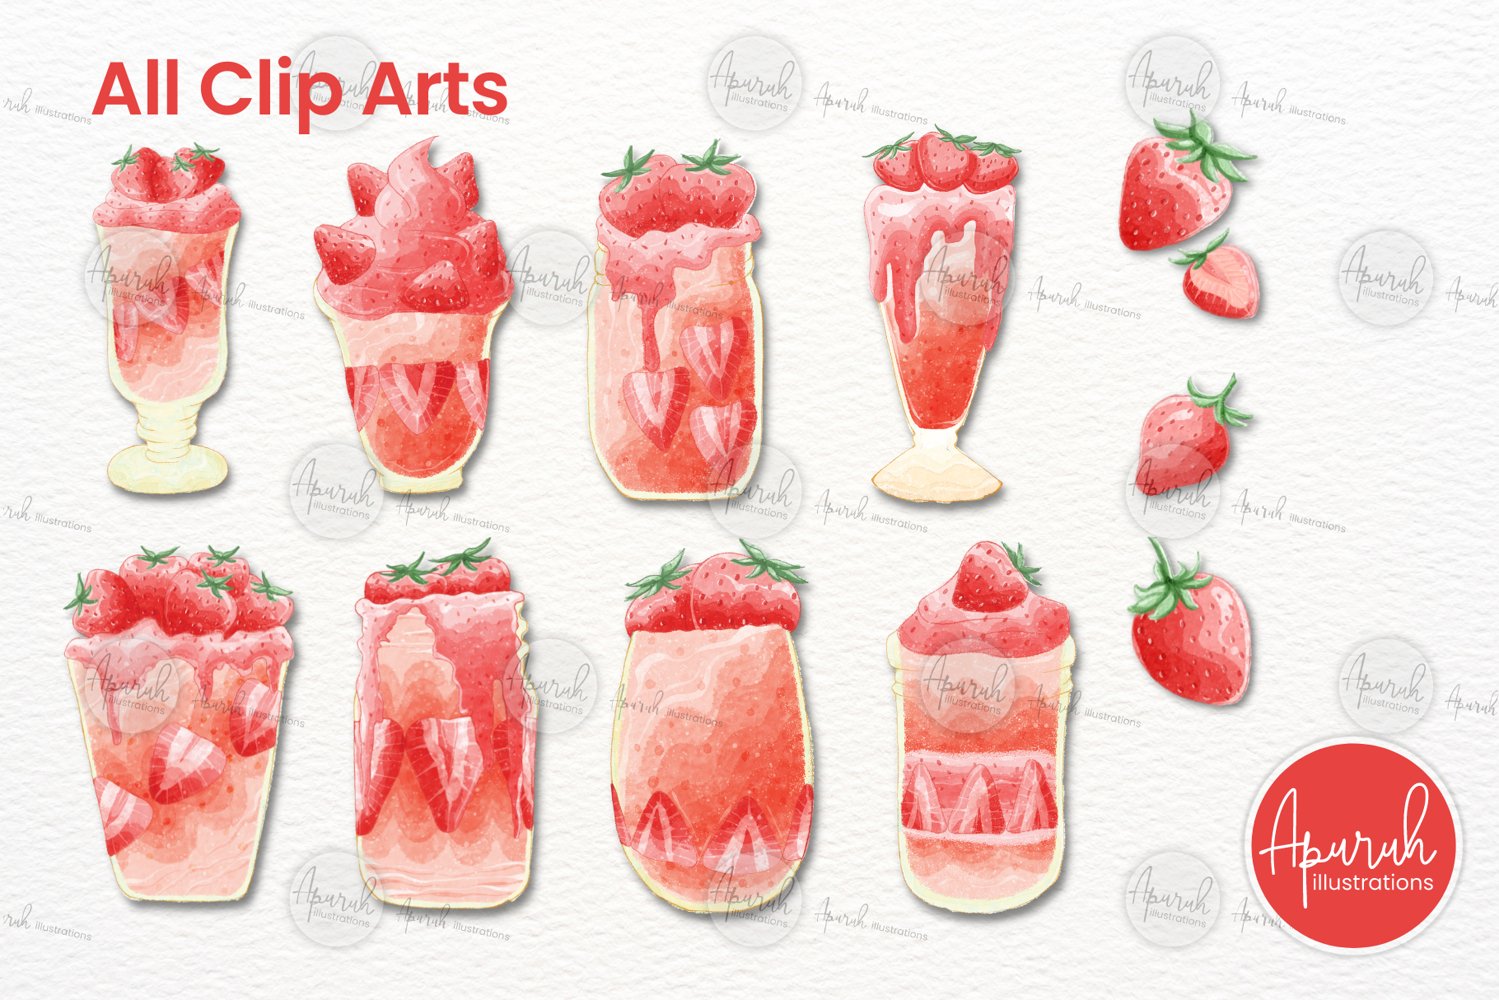 Strawberry Flavor Smoothies Summer Drinks Clipart in Watercolor Style.